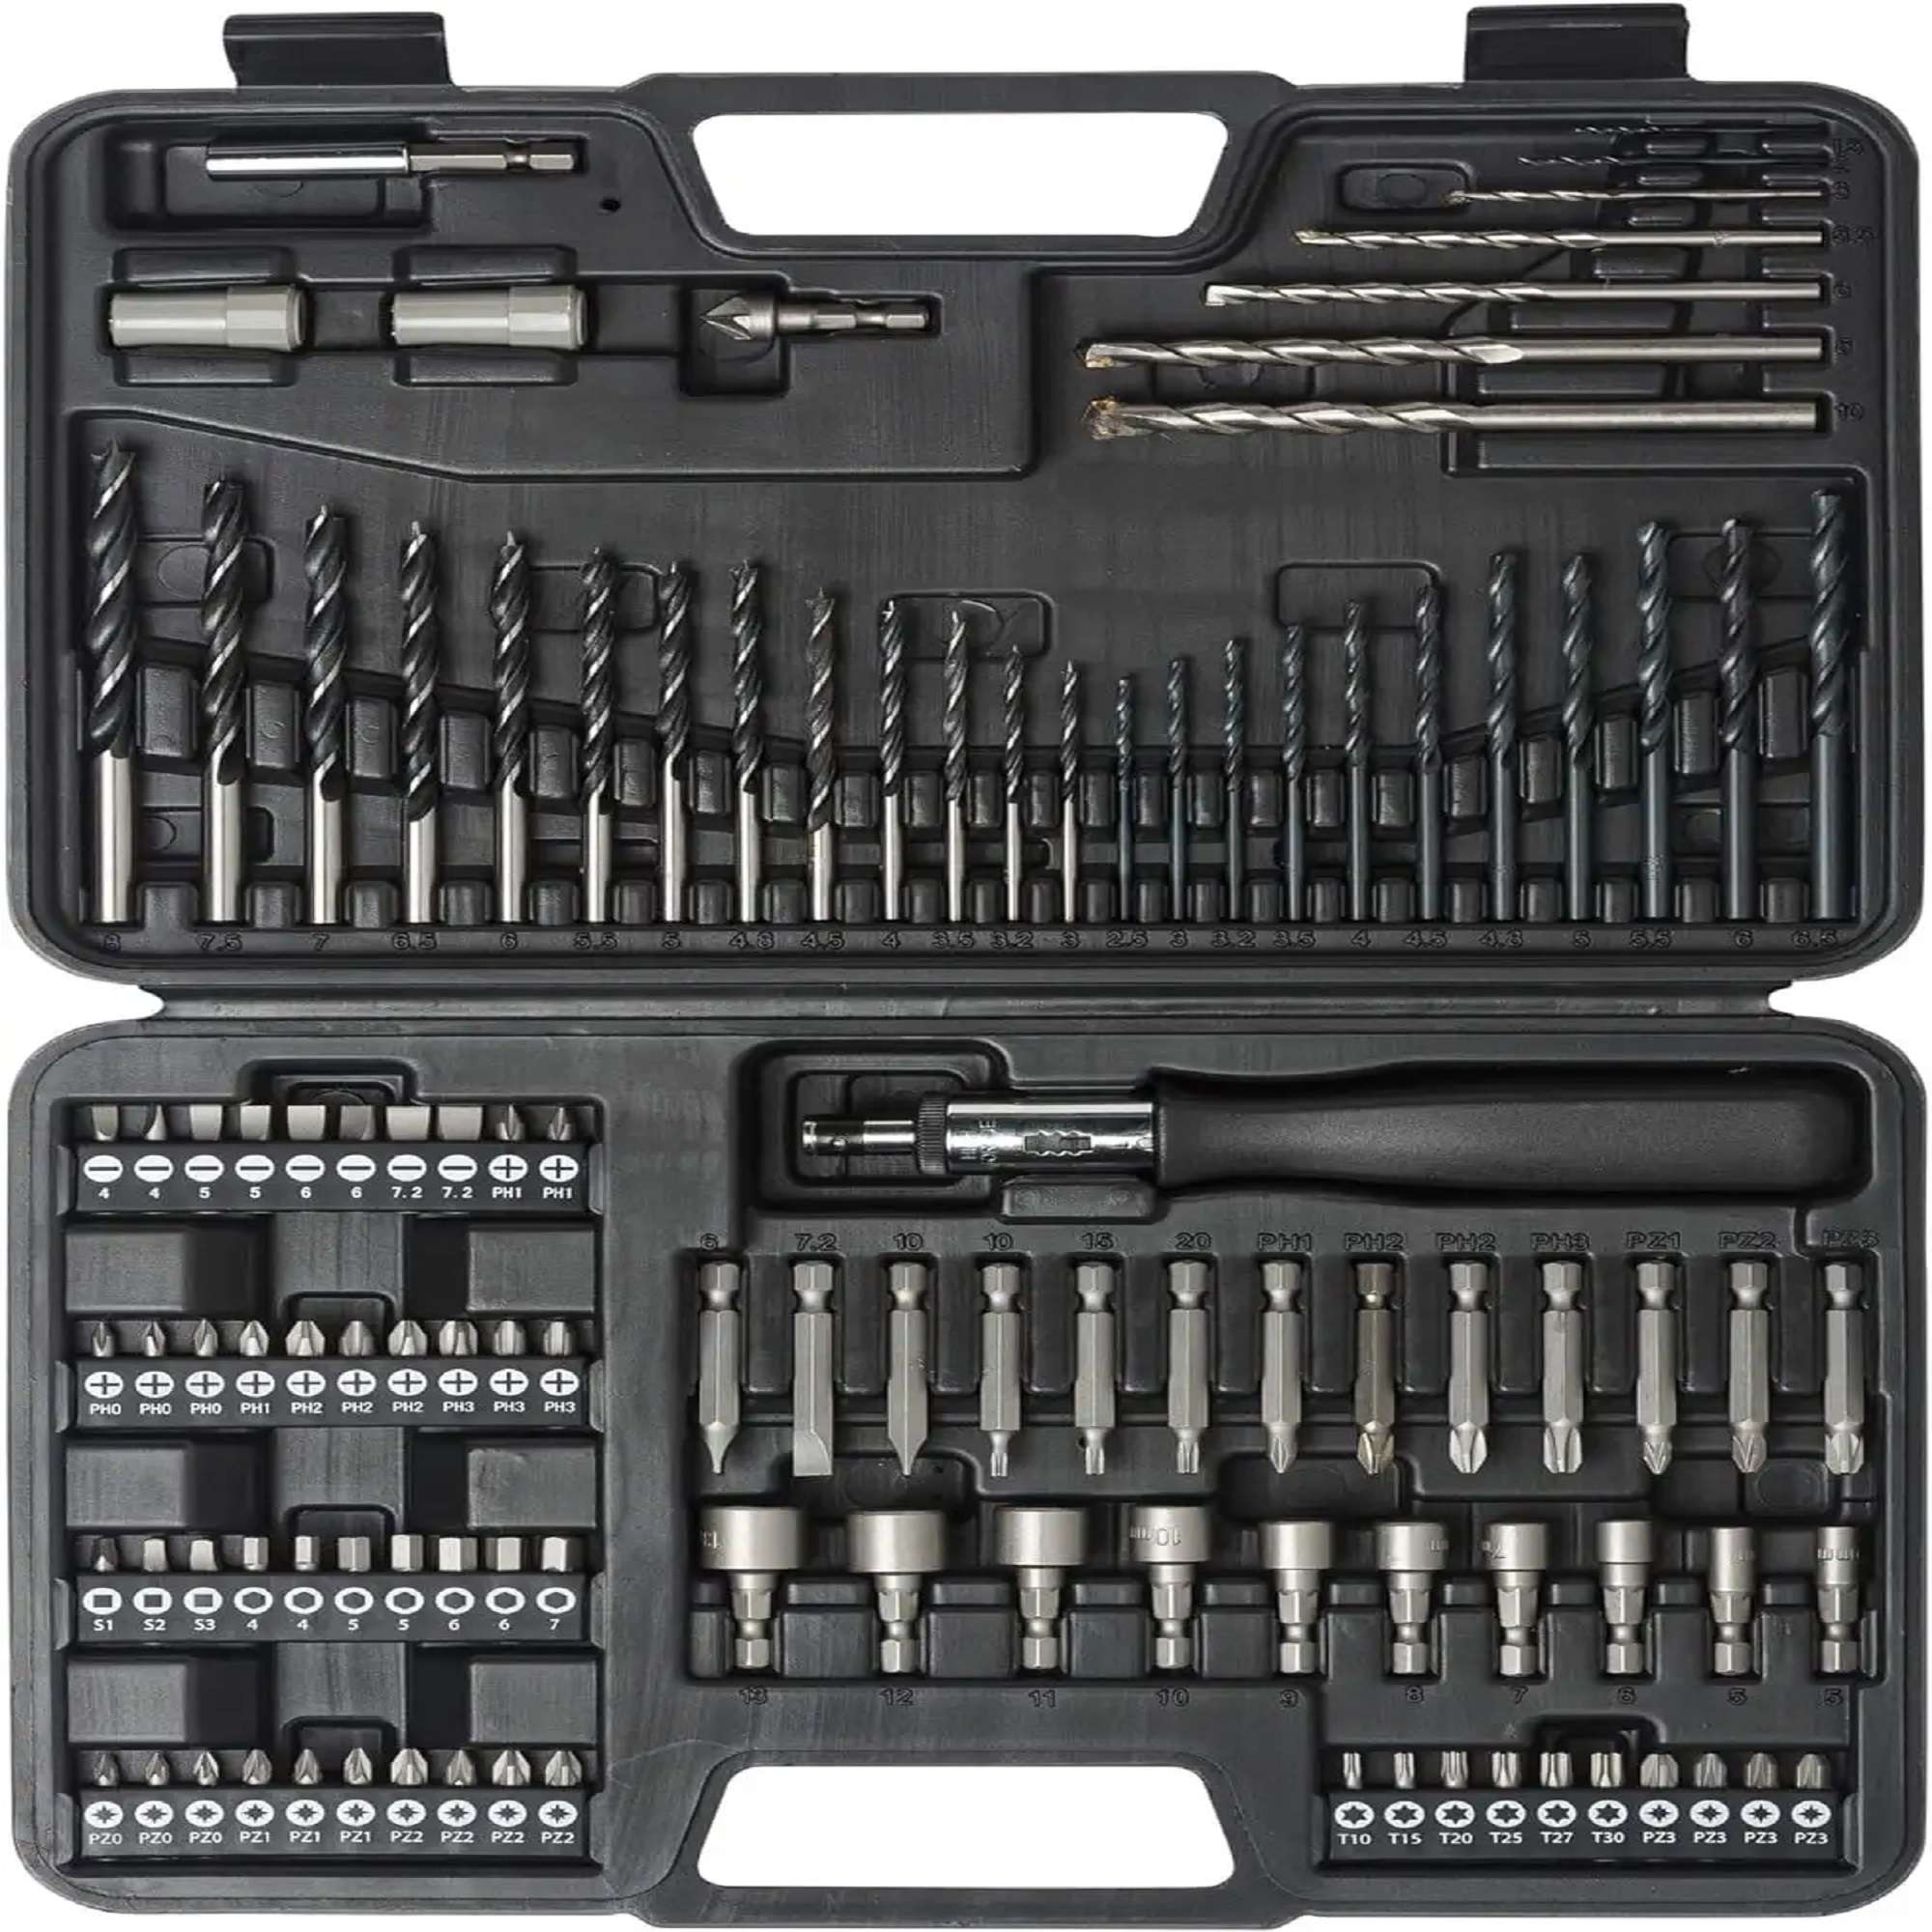 Kit 109pcs inserts and tips for screwing and drilling - DeWALT - DT0109